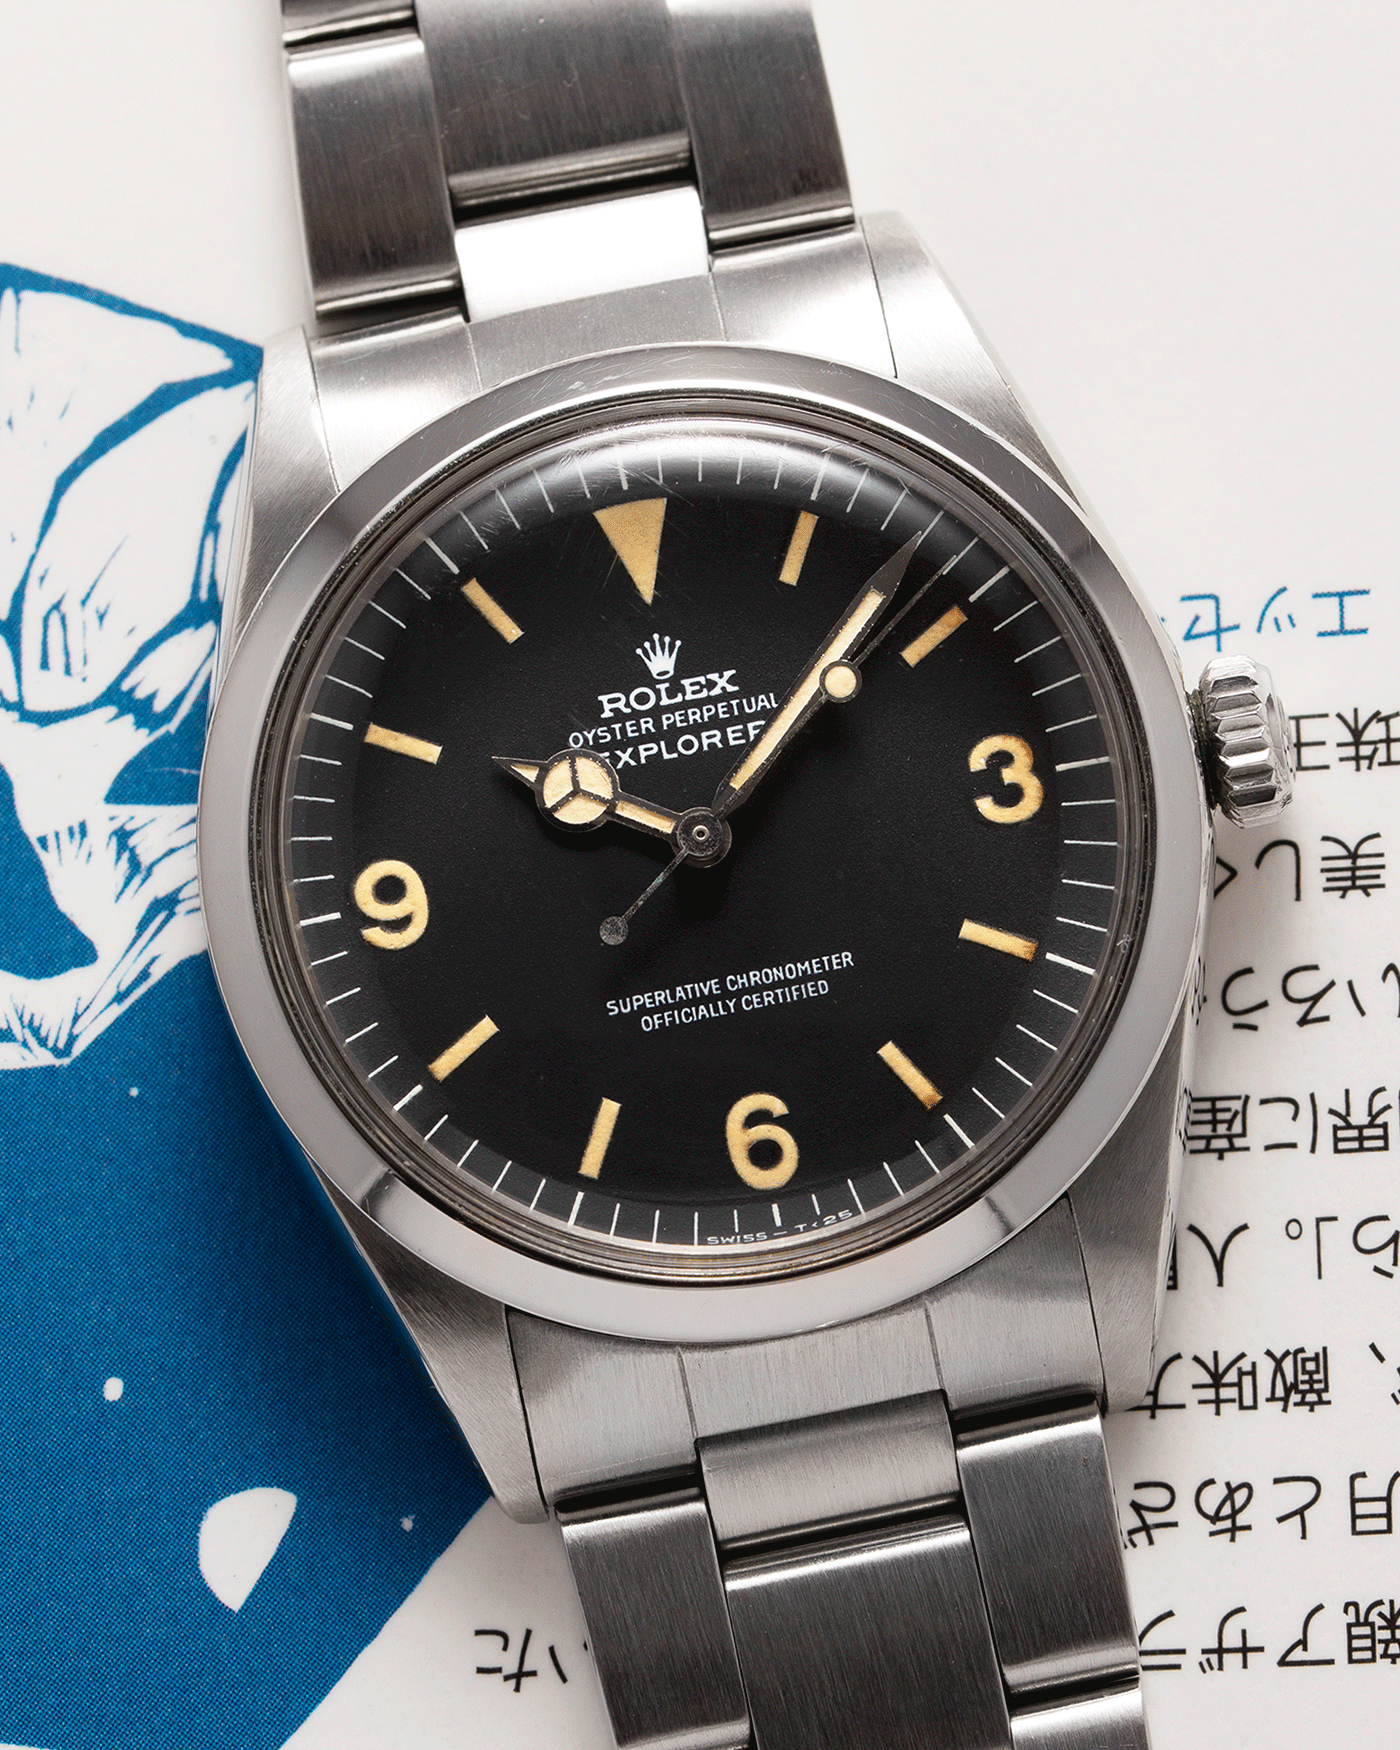 Brand: Rolex Year: 1972 Model: Explorer Reference Number: 1016 Serial Number: 2,9XXX,XXX Material: Stainless Steel Movement: Cal. 1570 Case Diameter: 36mm Lug Width: 20mm Bracelet/Strap: Rolex 78360 Oyster Bracelet with 558 end links